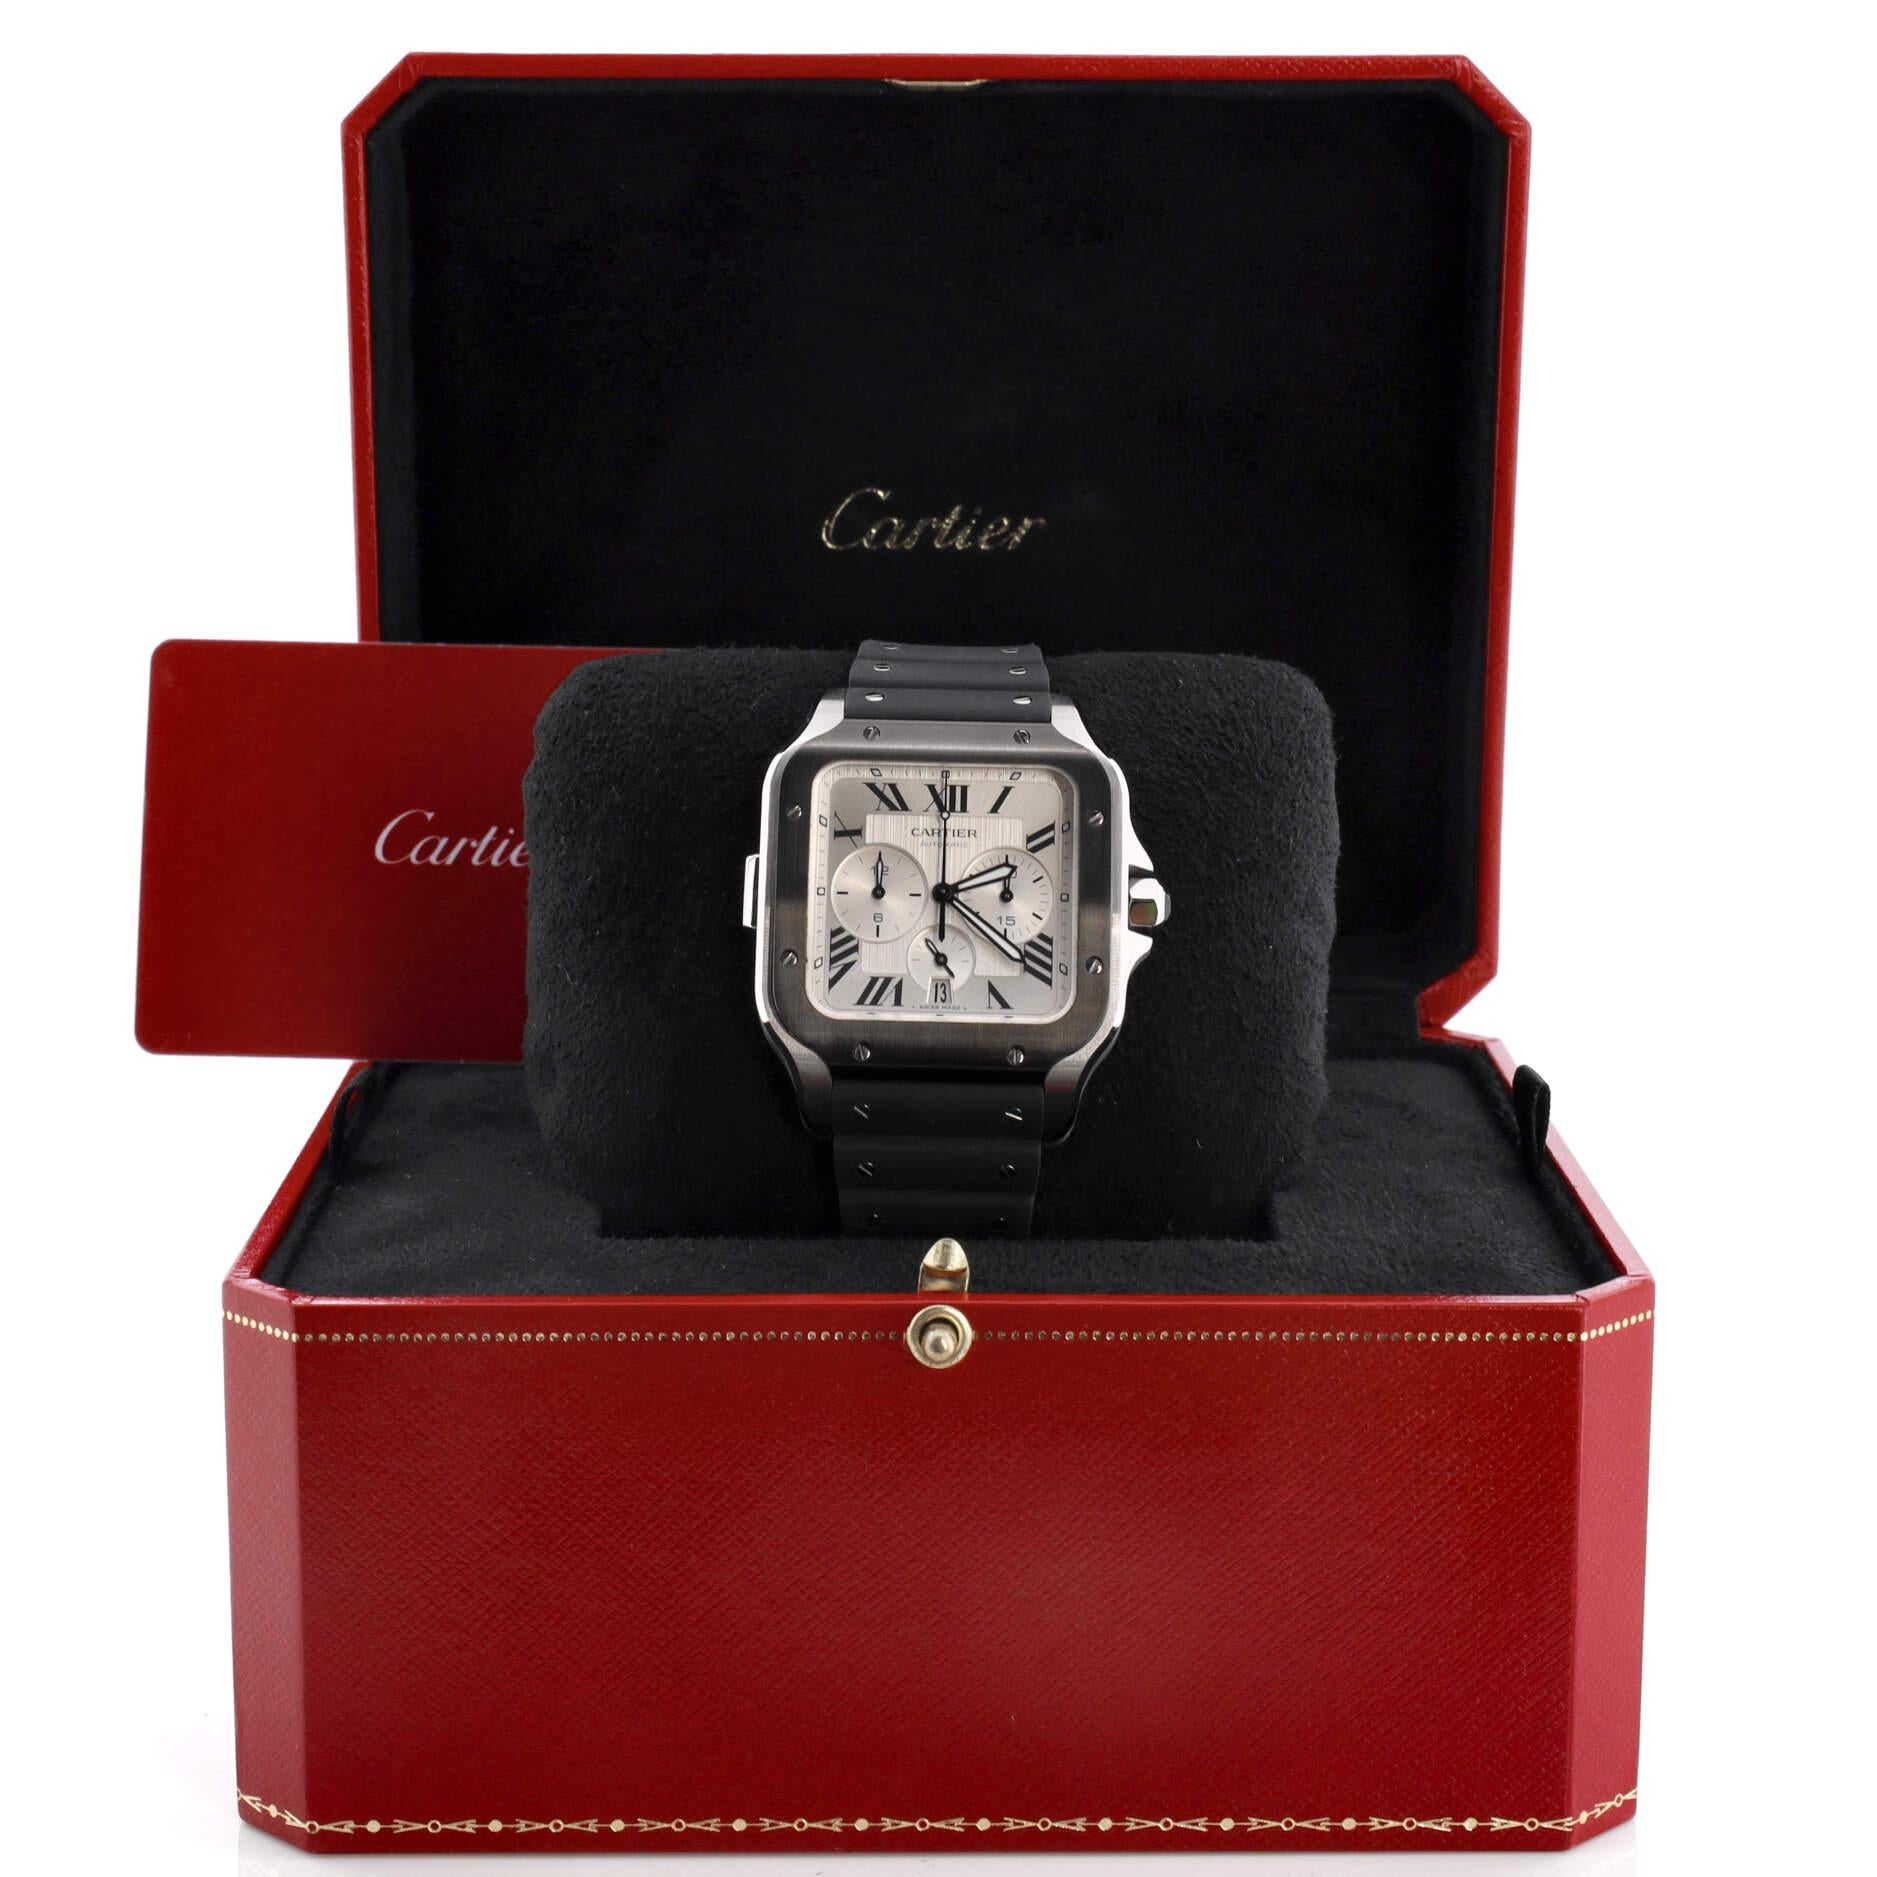 Condition: Excellent. Minor wear throughout case and strap.
Accessories: Box, Warranty Card - Dated
Measurements: Case Size/Width: 43mm, Watch Height: 12mm, Band Width: 23mm, Wrist circumference: 7.0